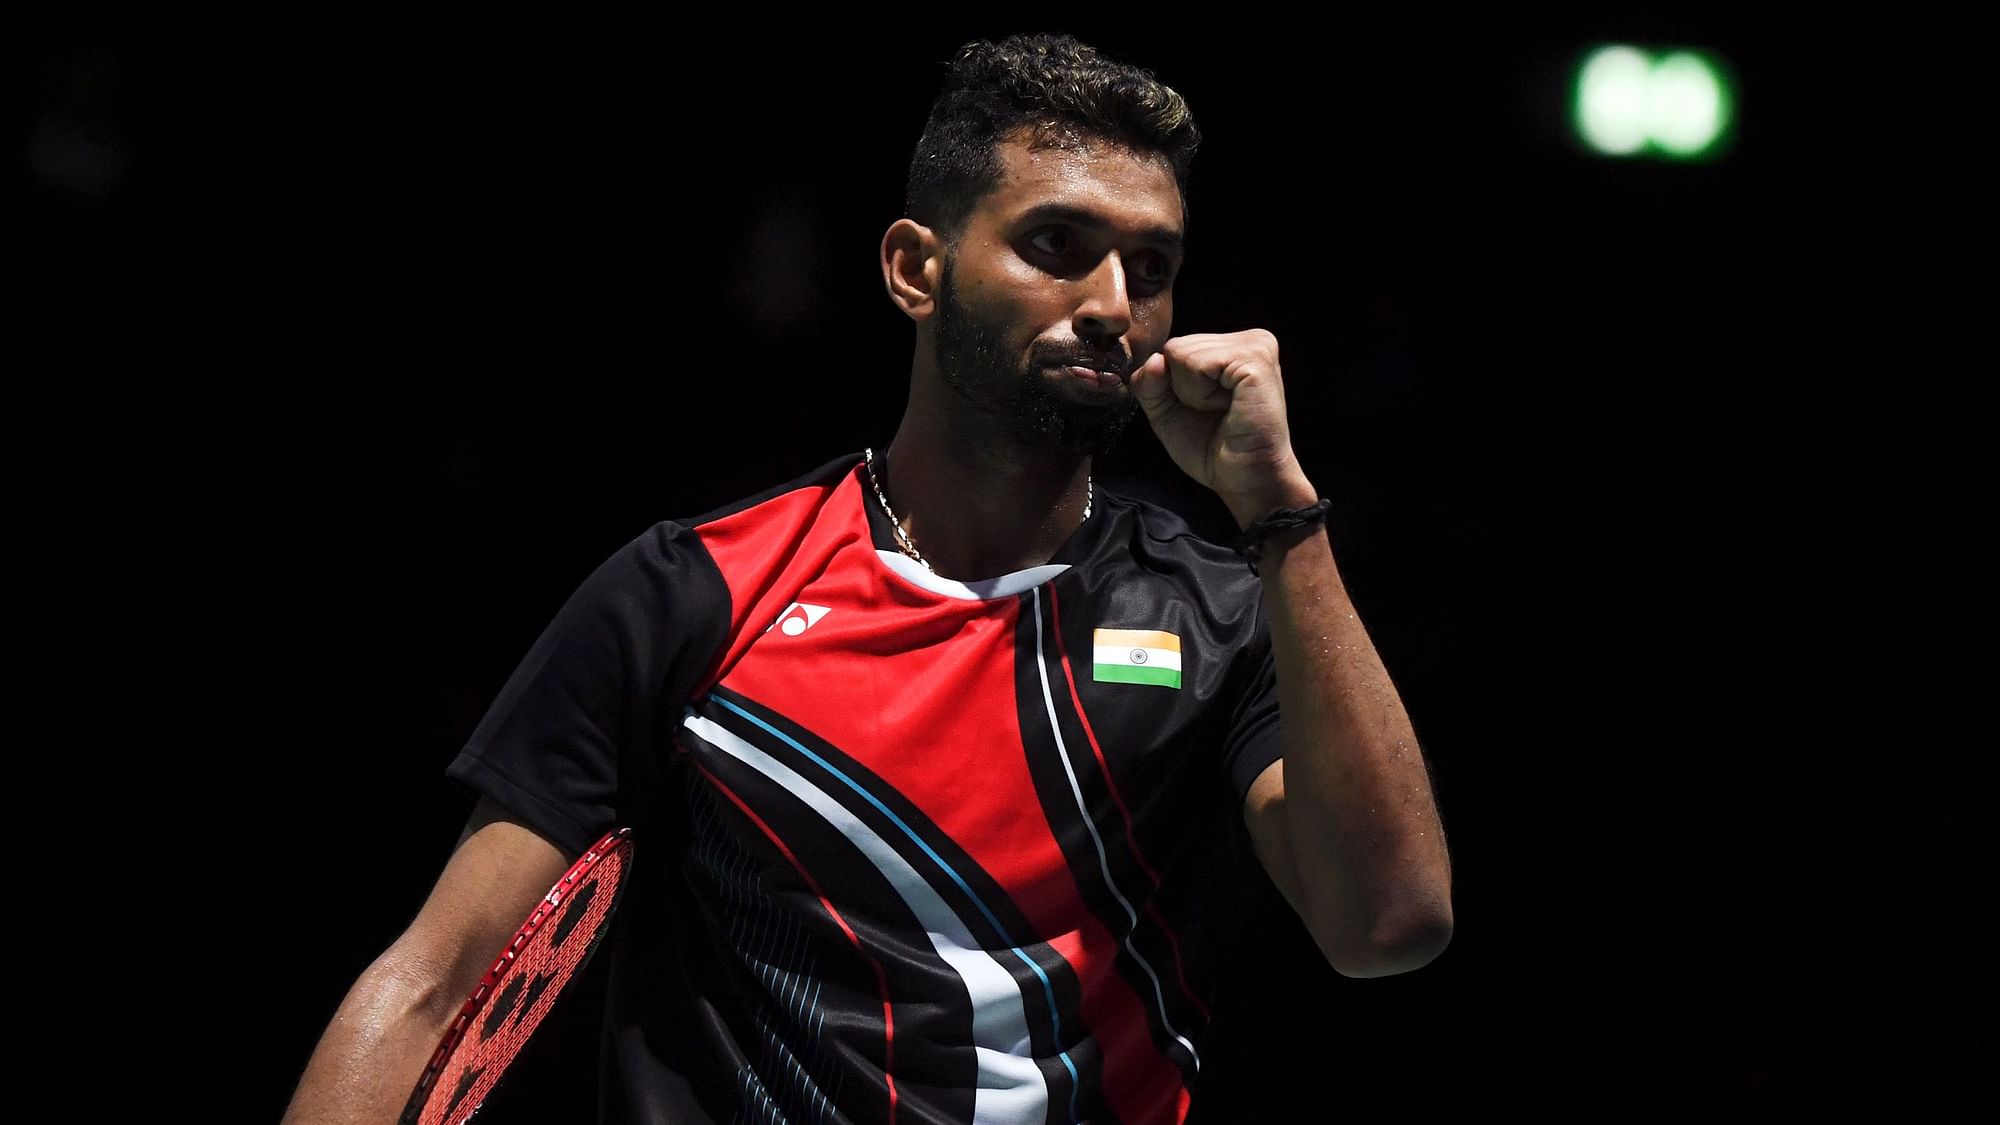 HS Prannoy hits out at the badminton federation for not nominating his name for the Arjuna Award, two years in a row.